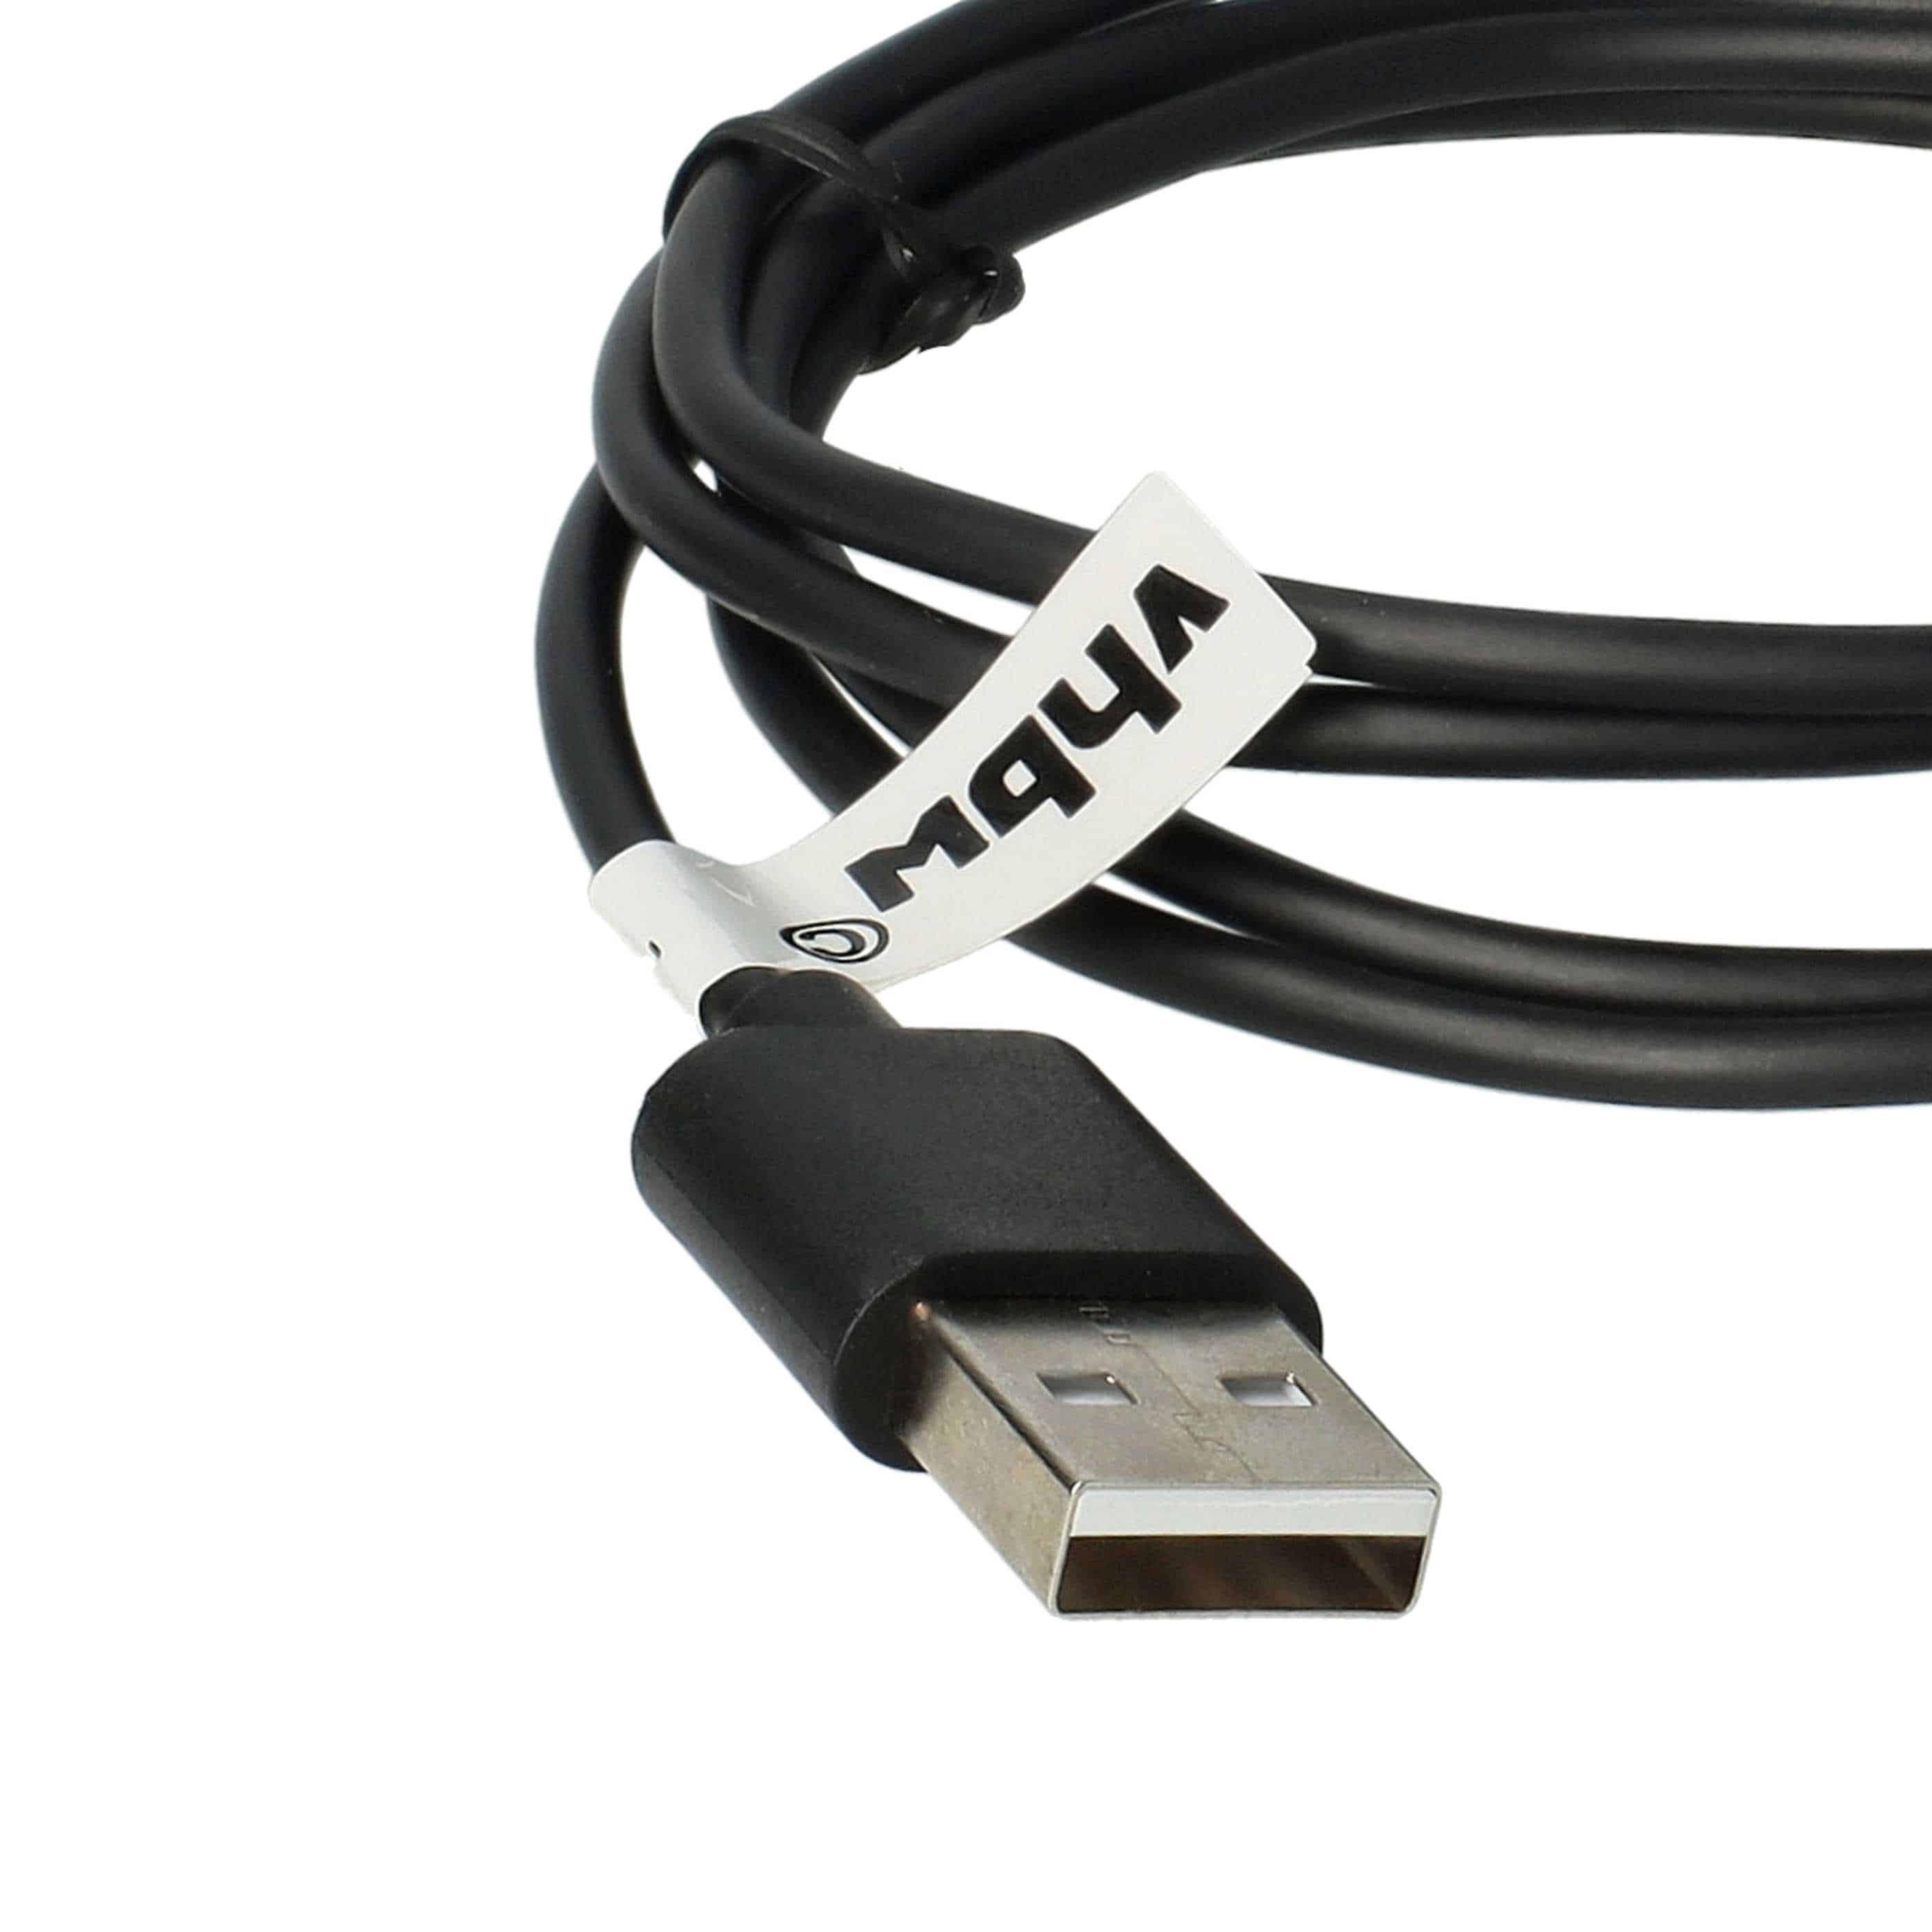 USB Charging Cable replaces Sony XPZ1-M for Sony Tablet - 100 cm, Magnetic